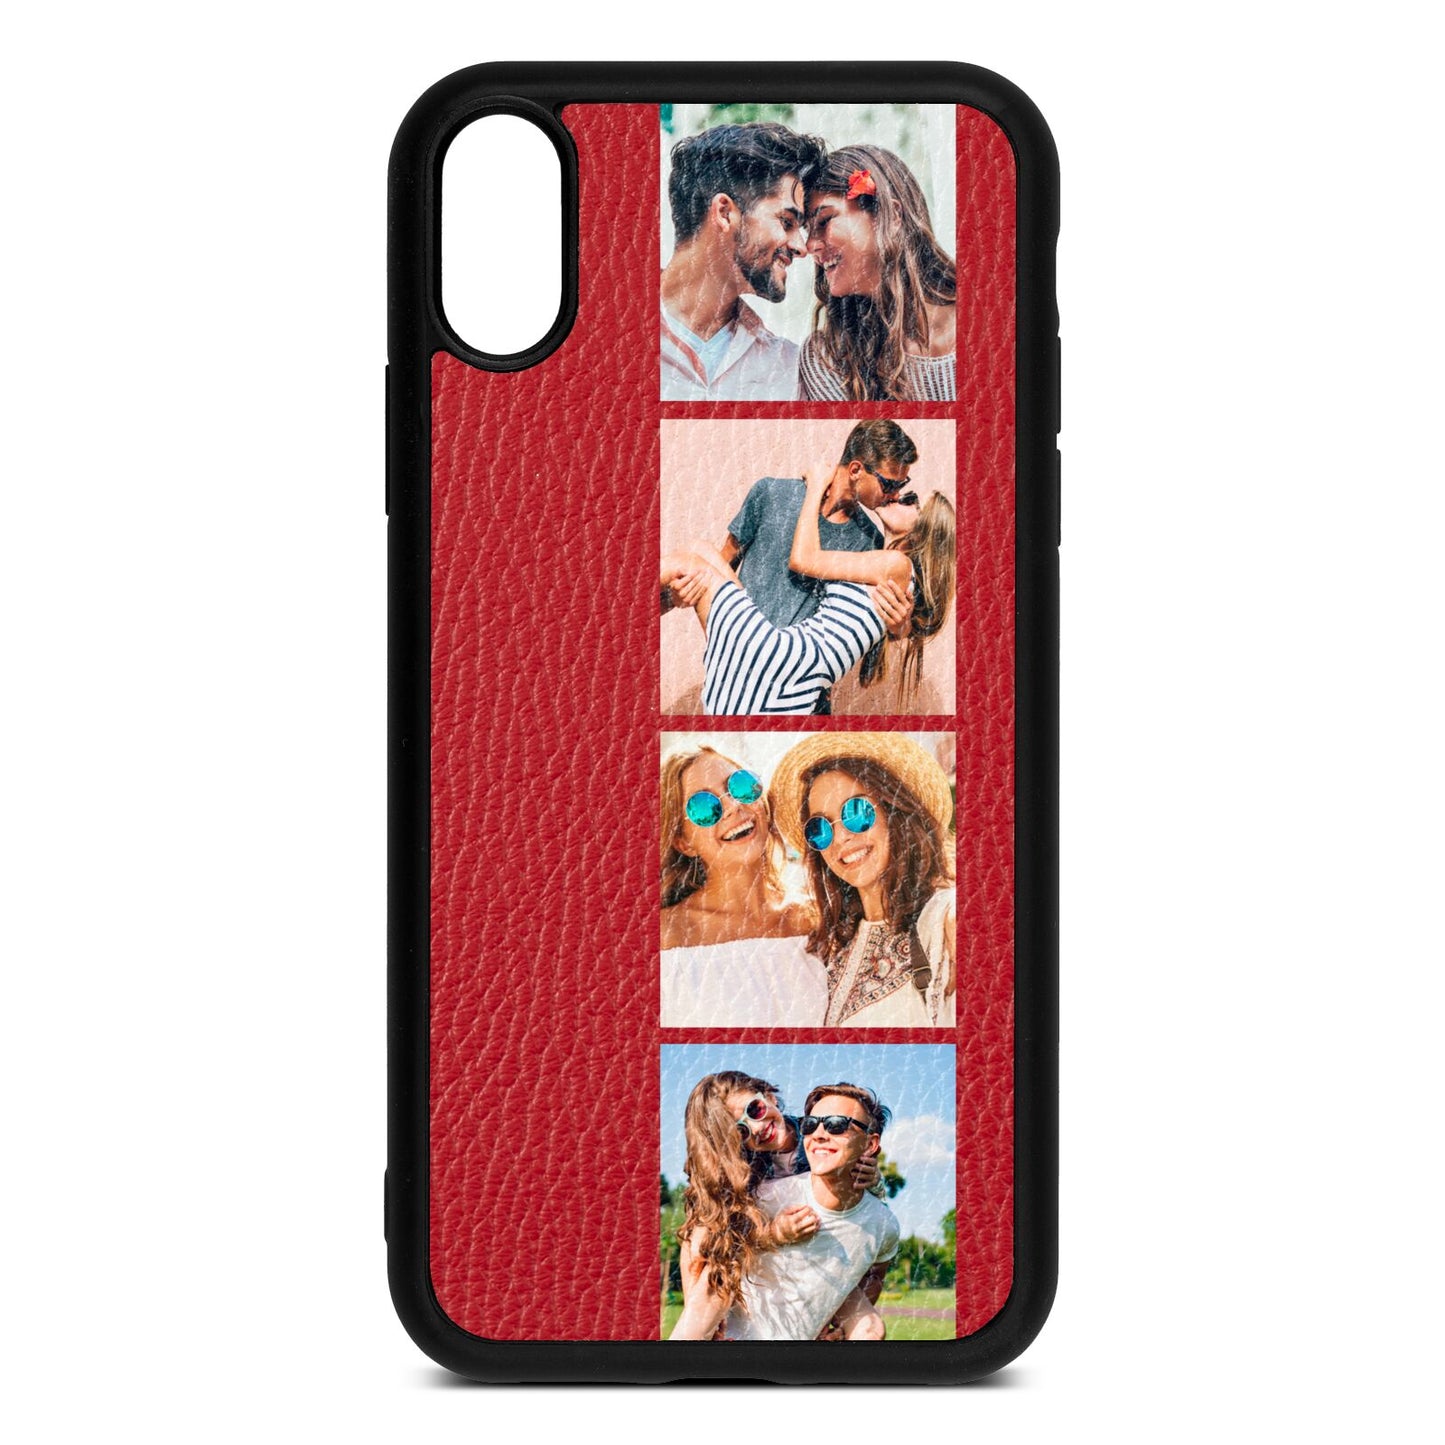 Photo Strip Montage Upload Red Pebble Leather iPhone Xr Case